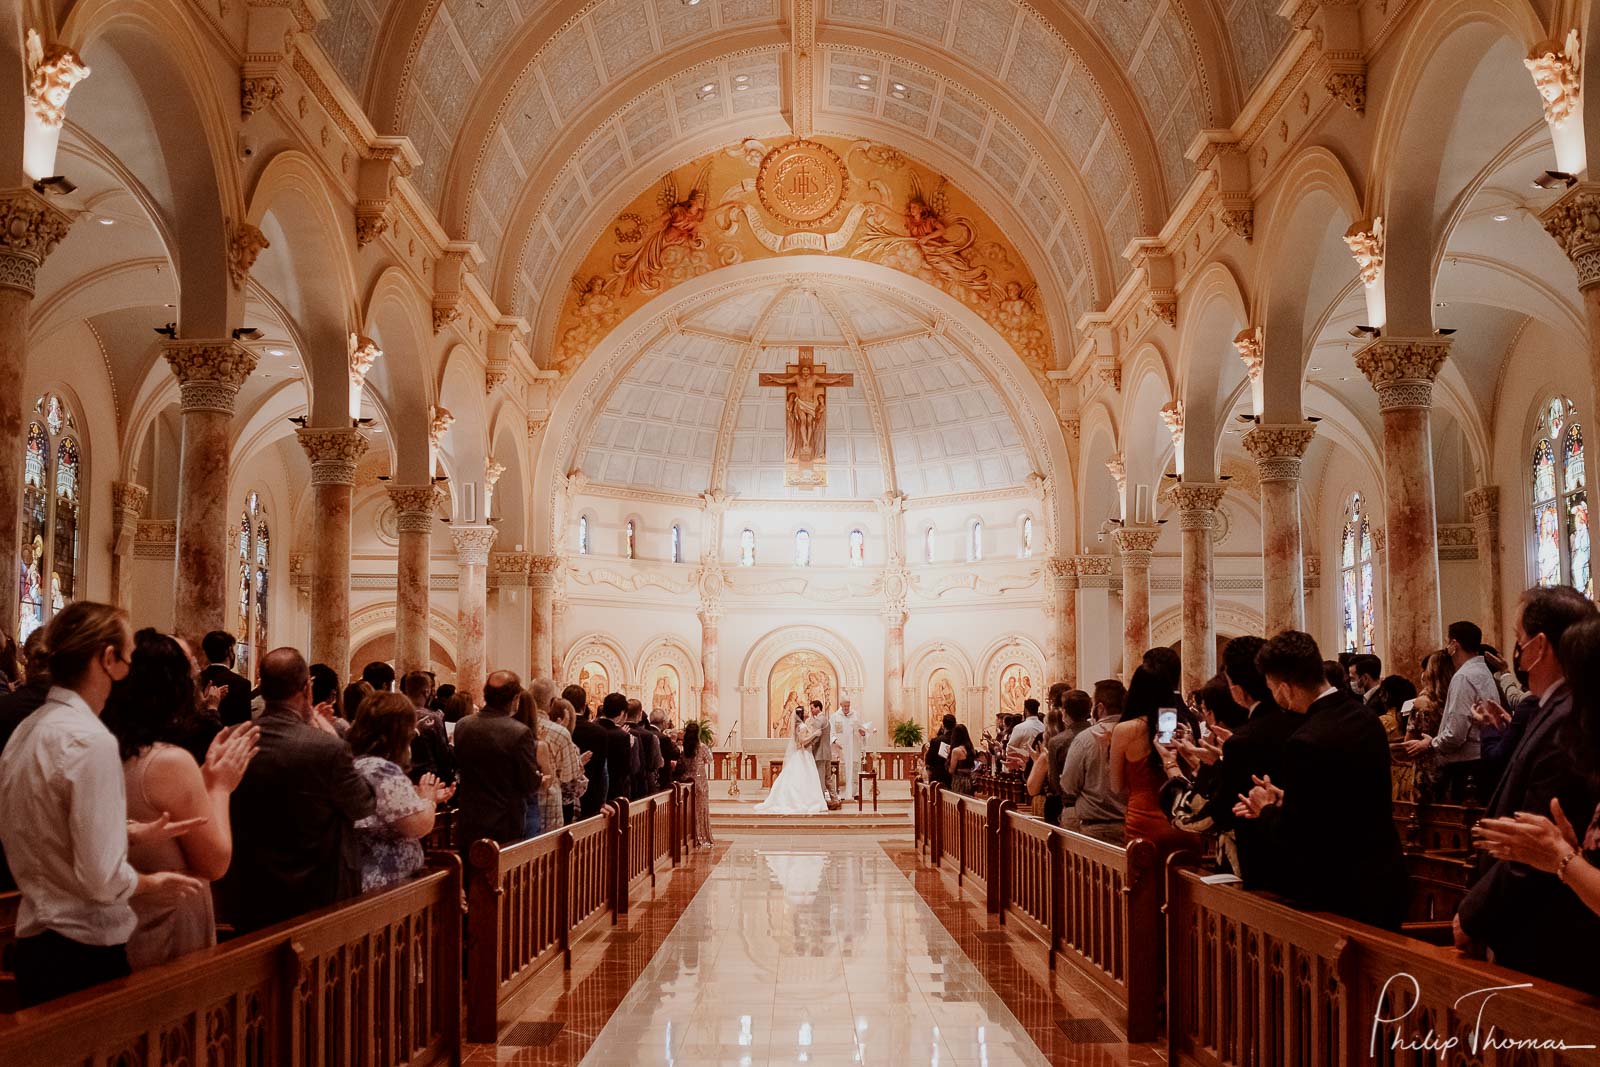 Couple wed at the Chapel of the incarnate word wedding ceremony